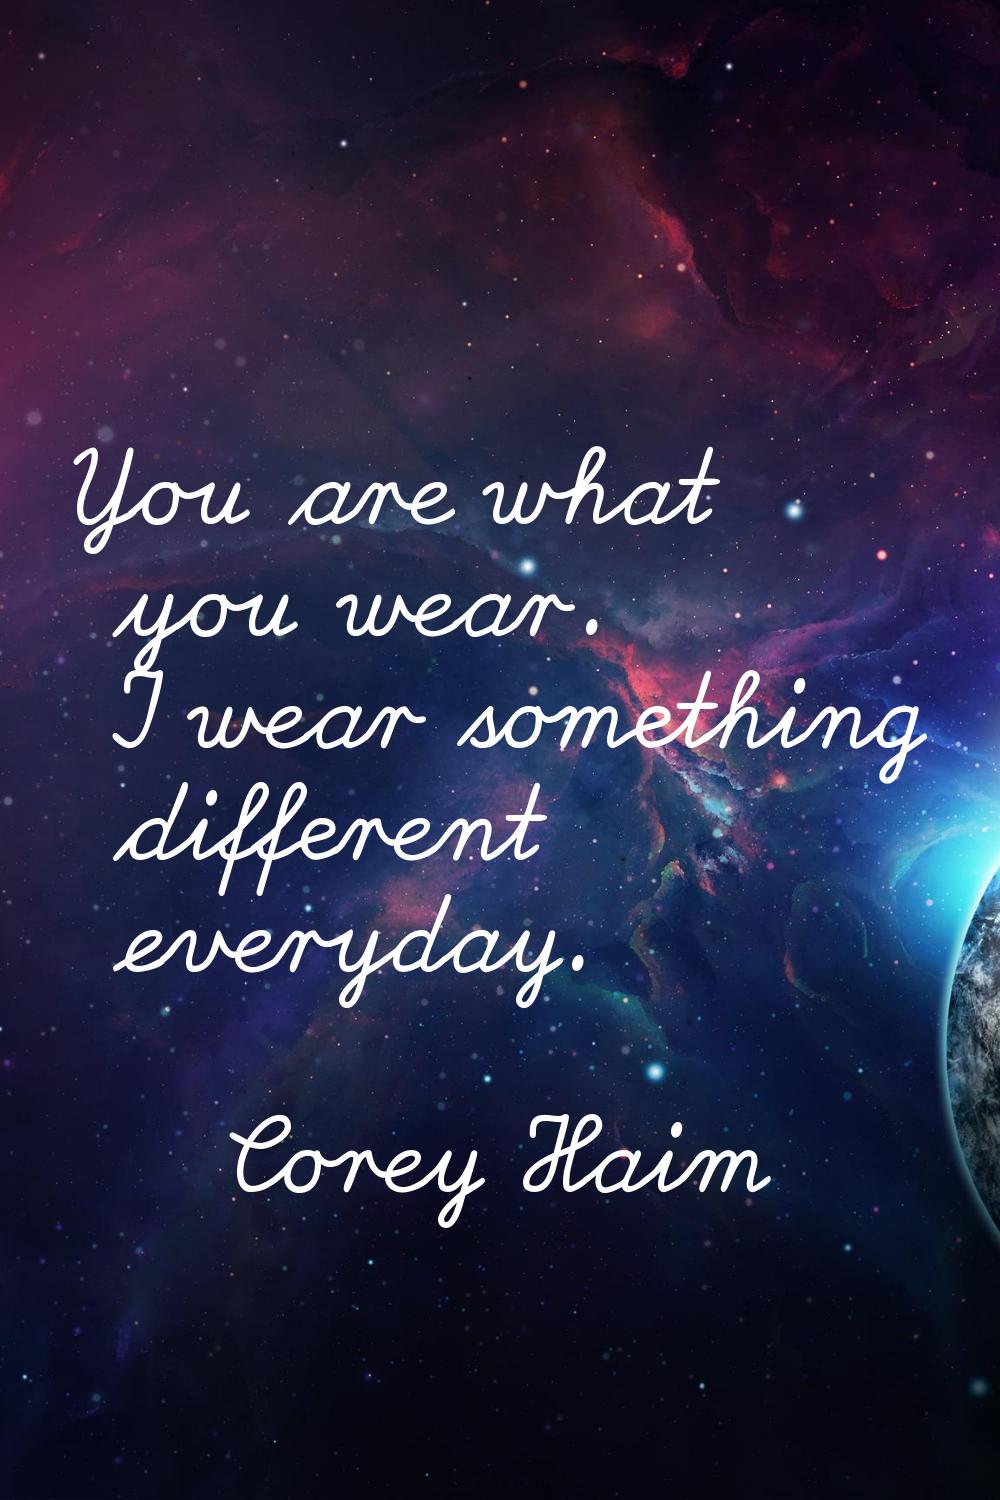 You are what you wear. I wear something different everyday.